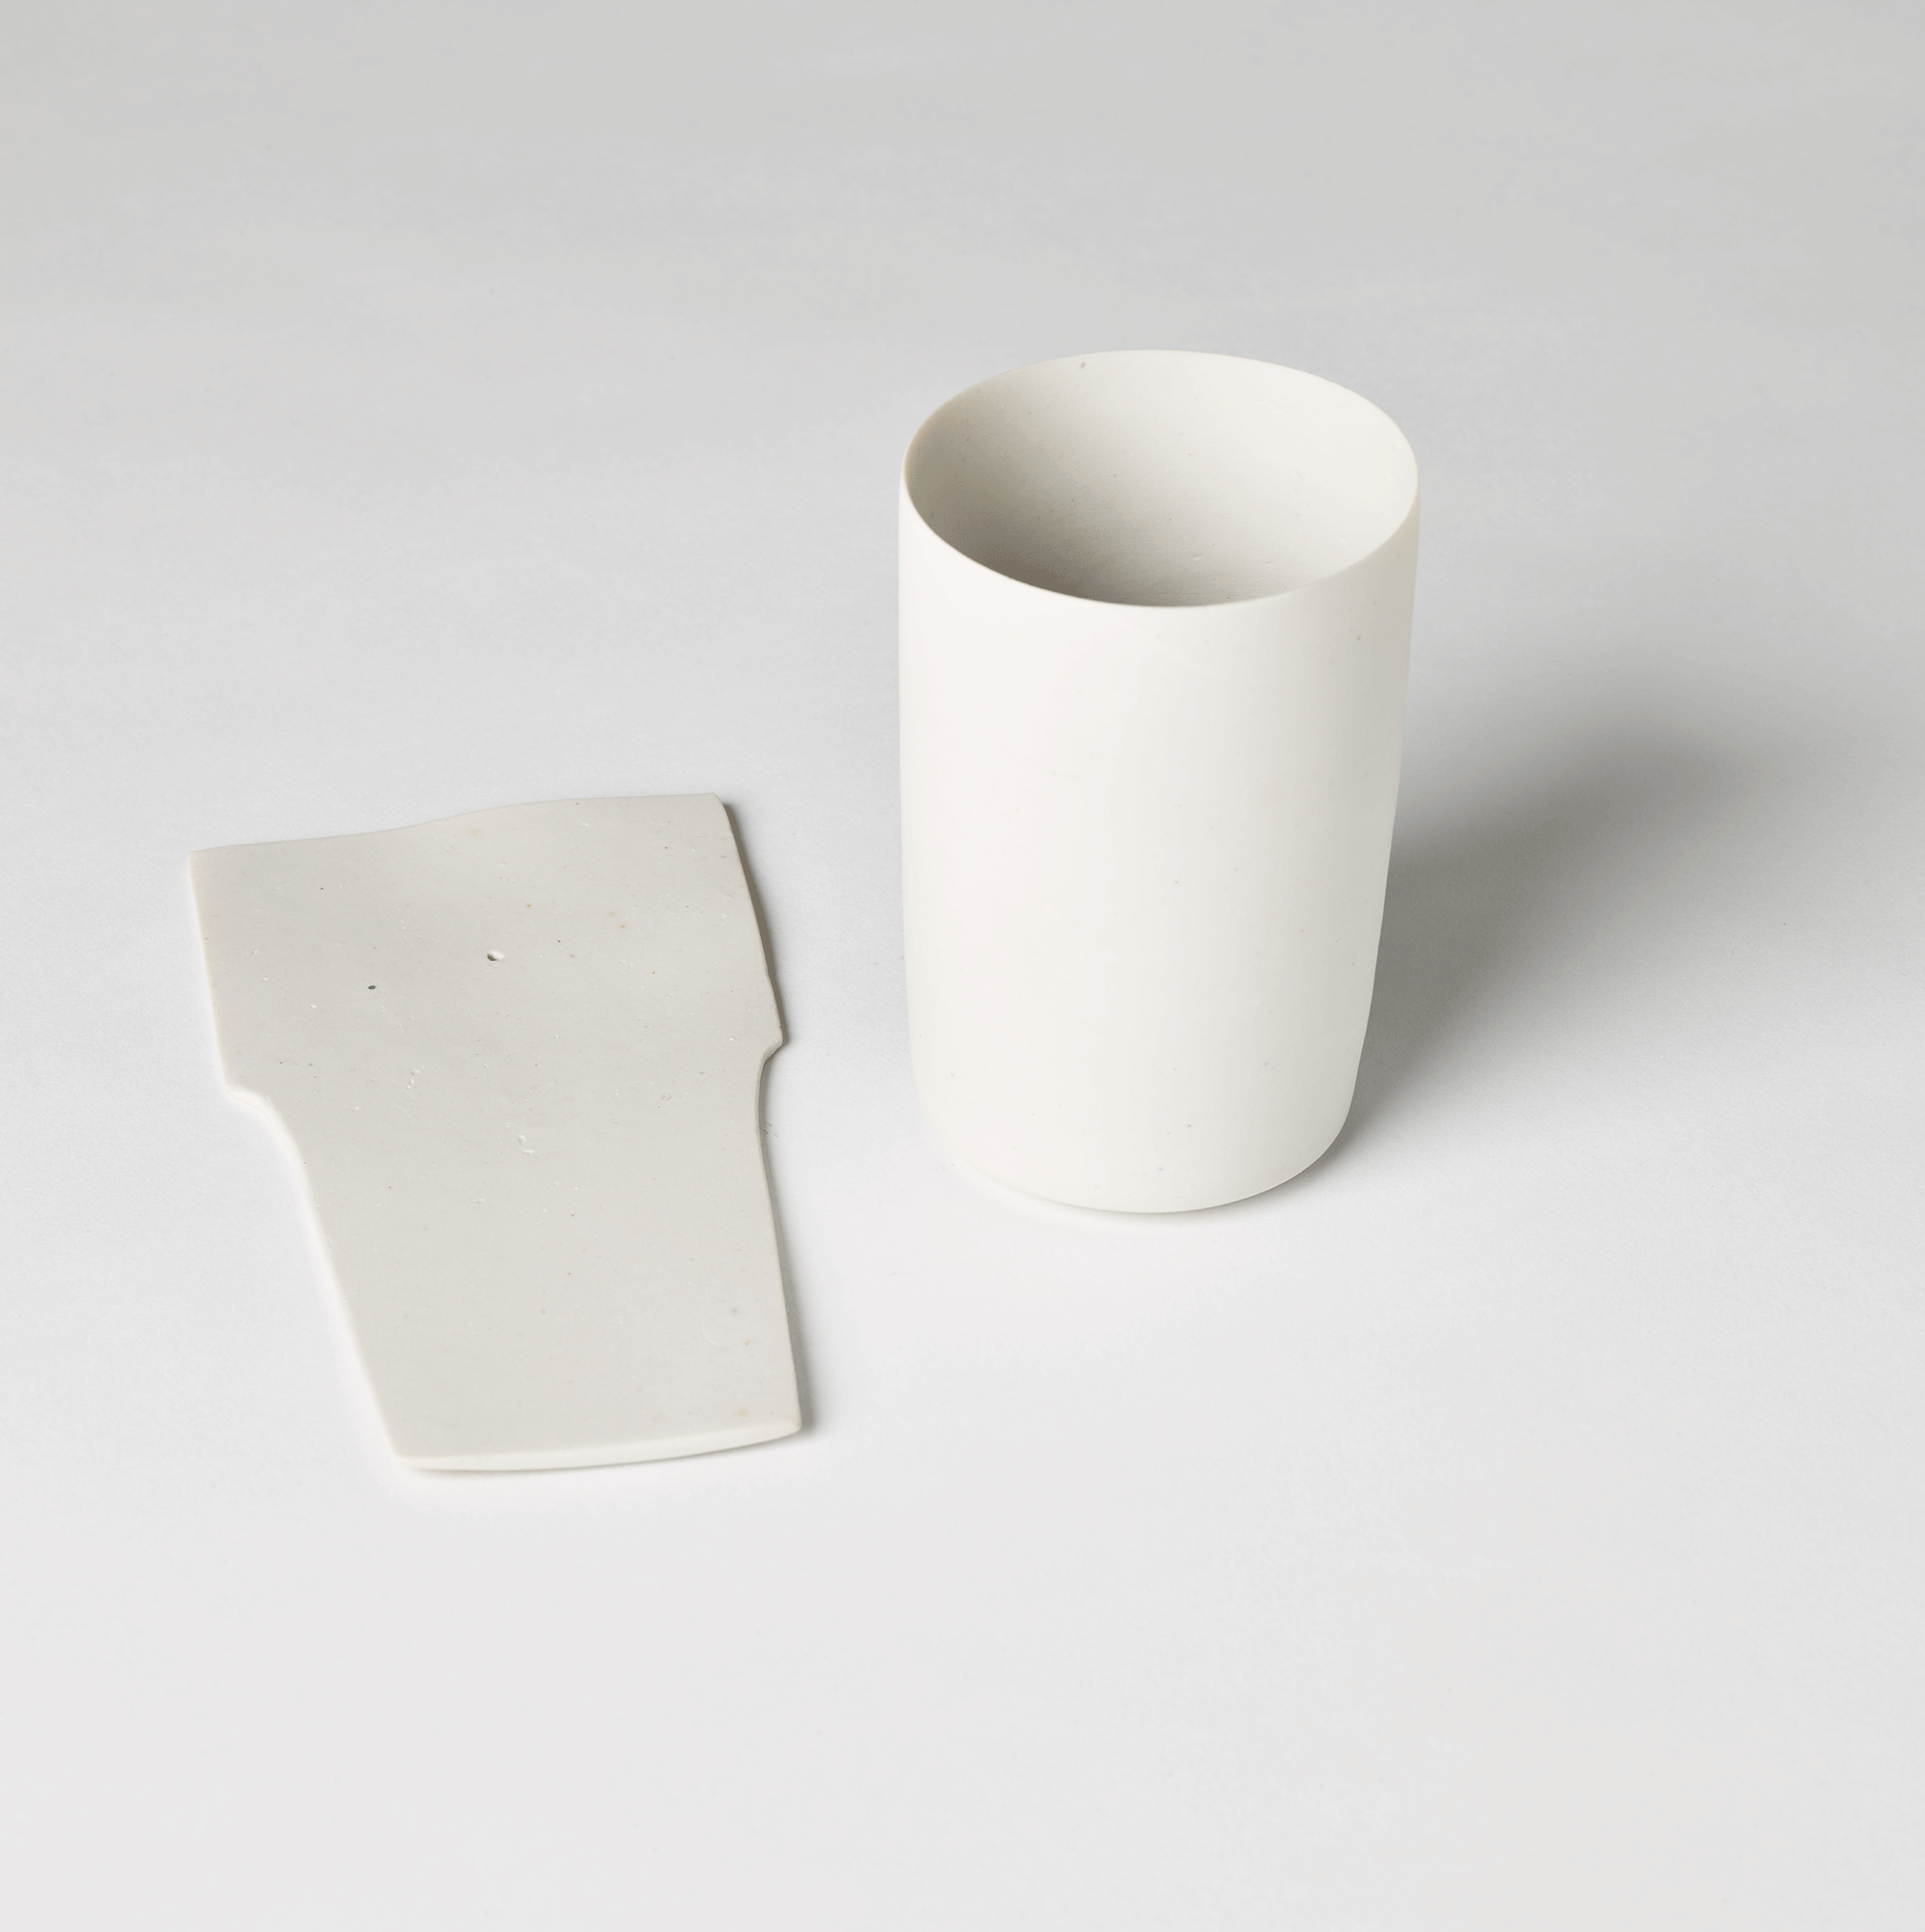 Thin, white slice of clay lying next to the white cup.